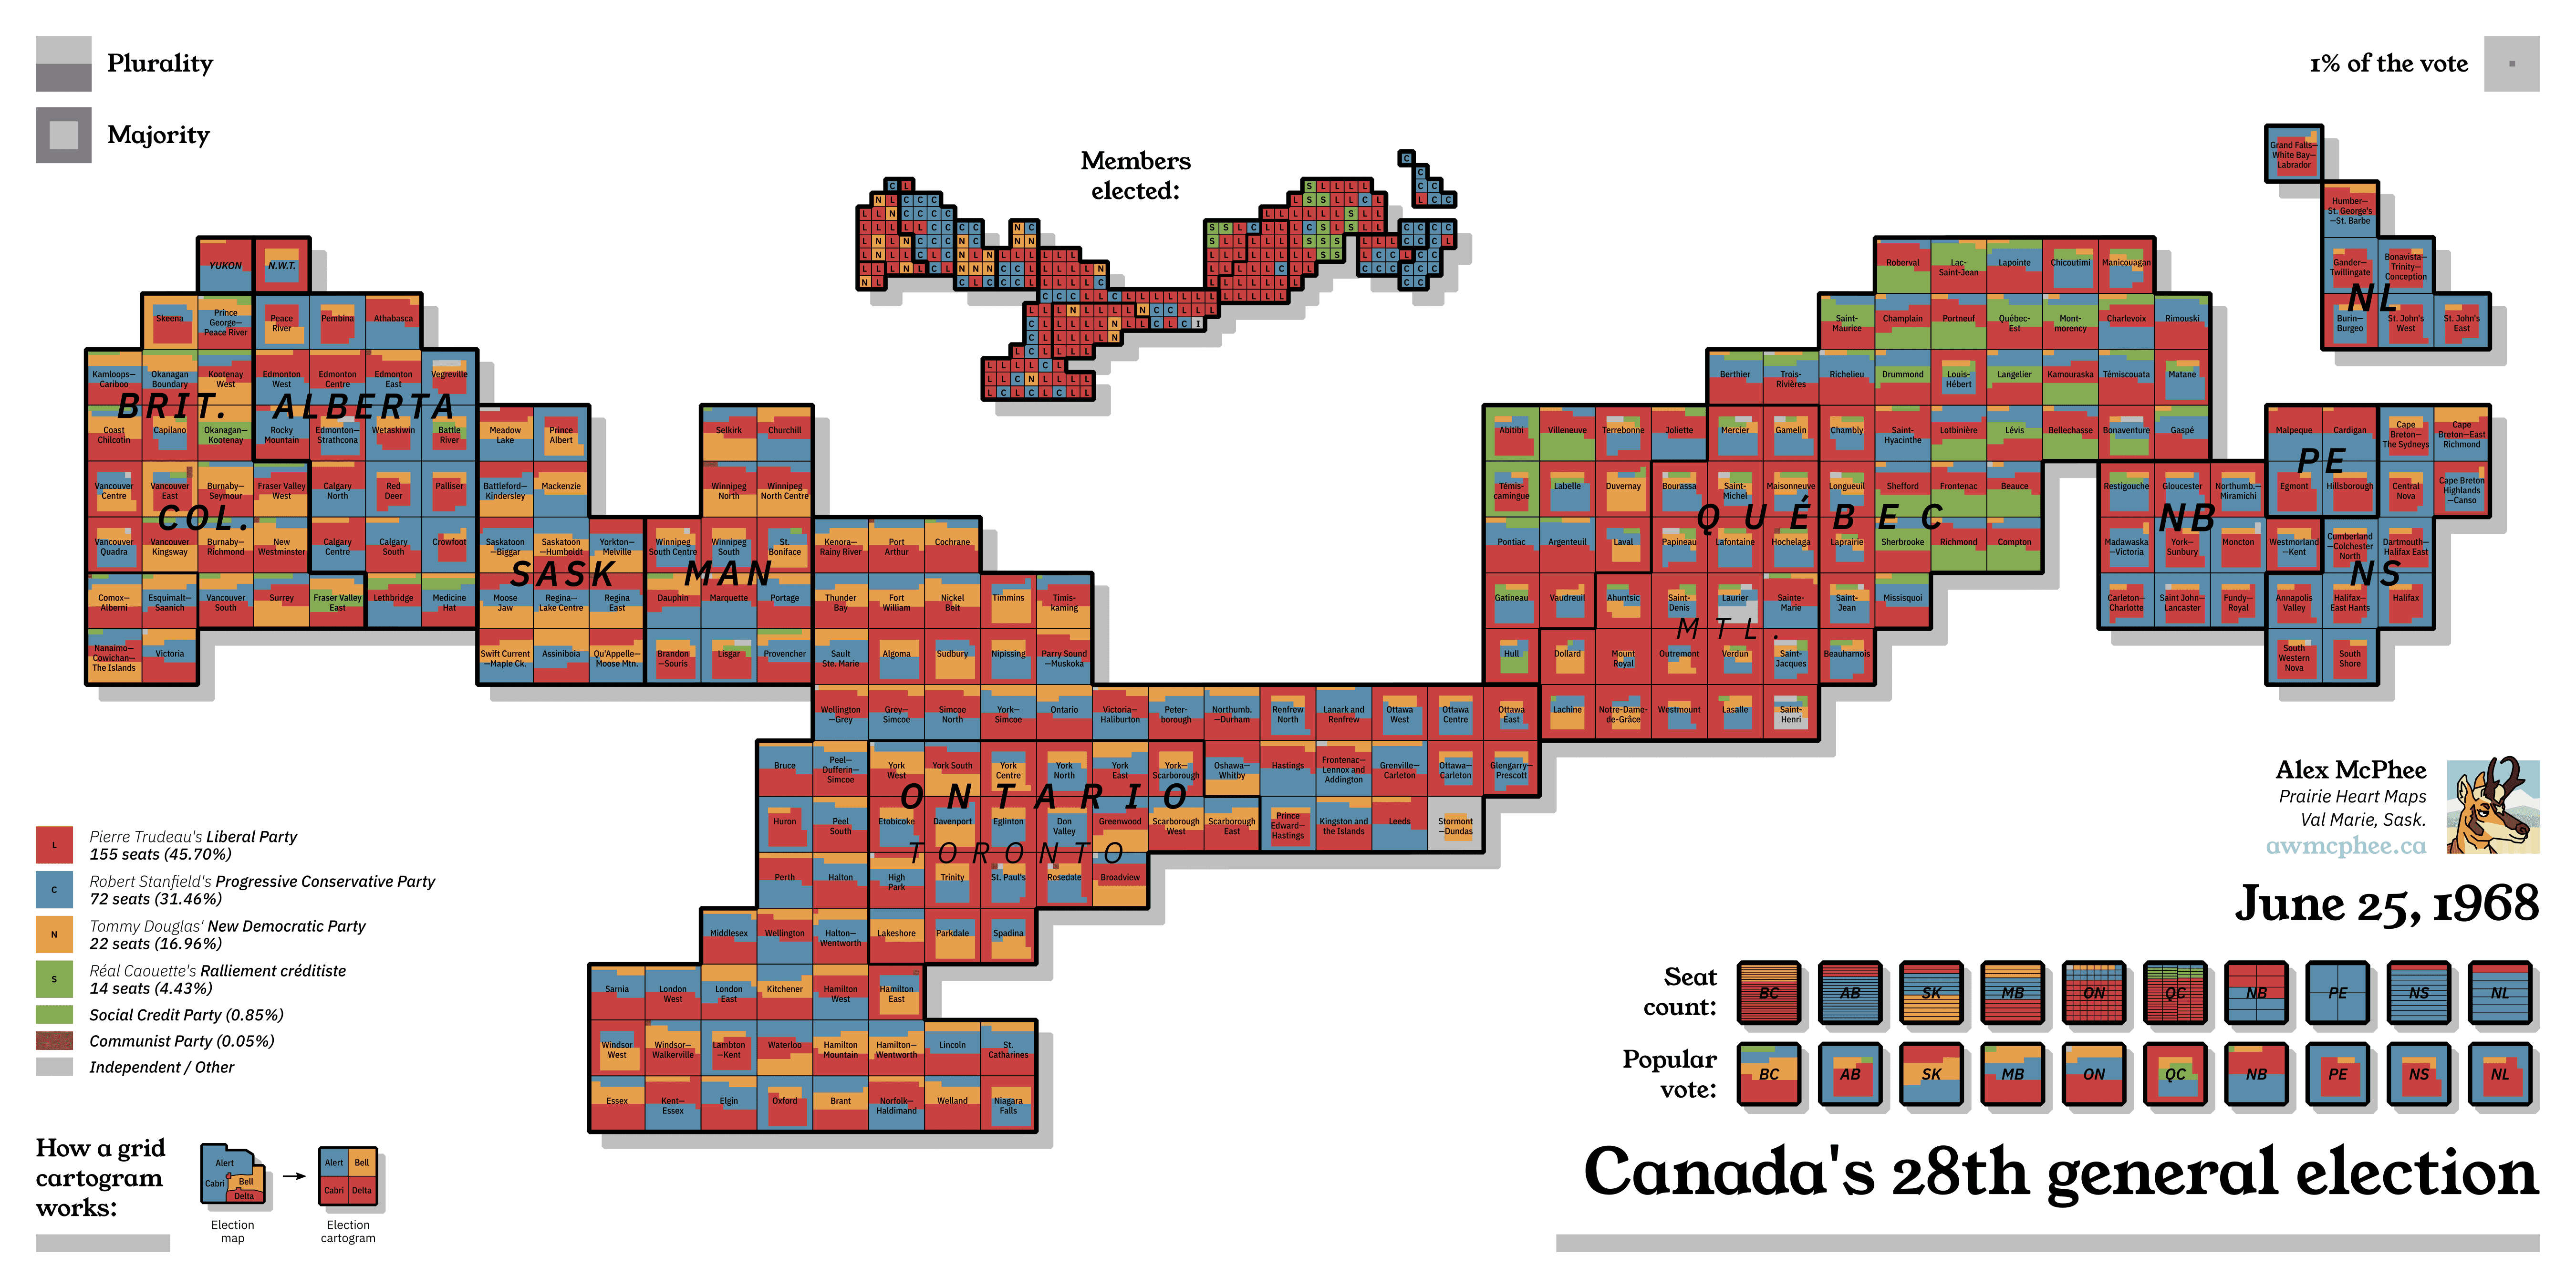 A grid cartogram depicting the popular vote in the 1968 Canadian election.